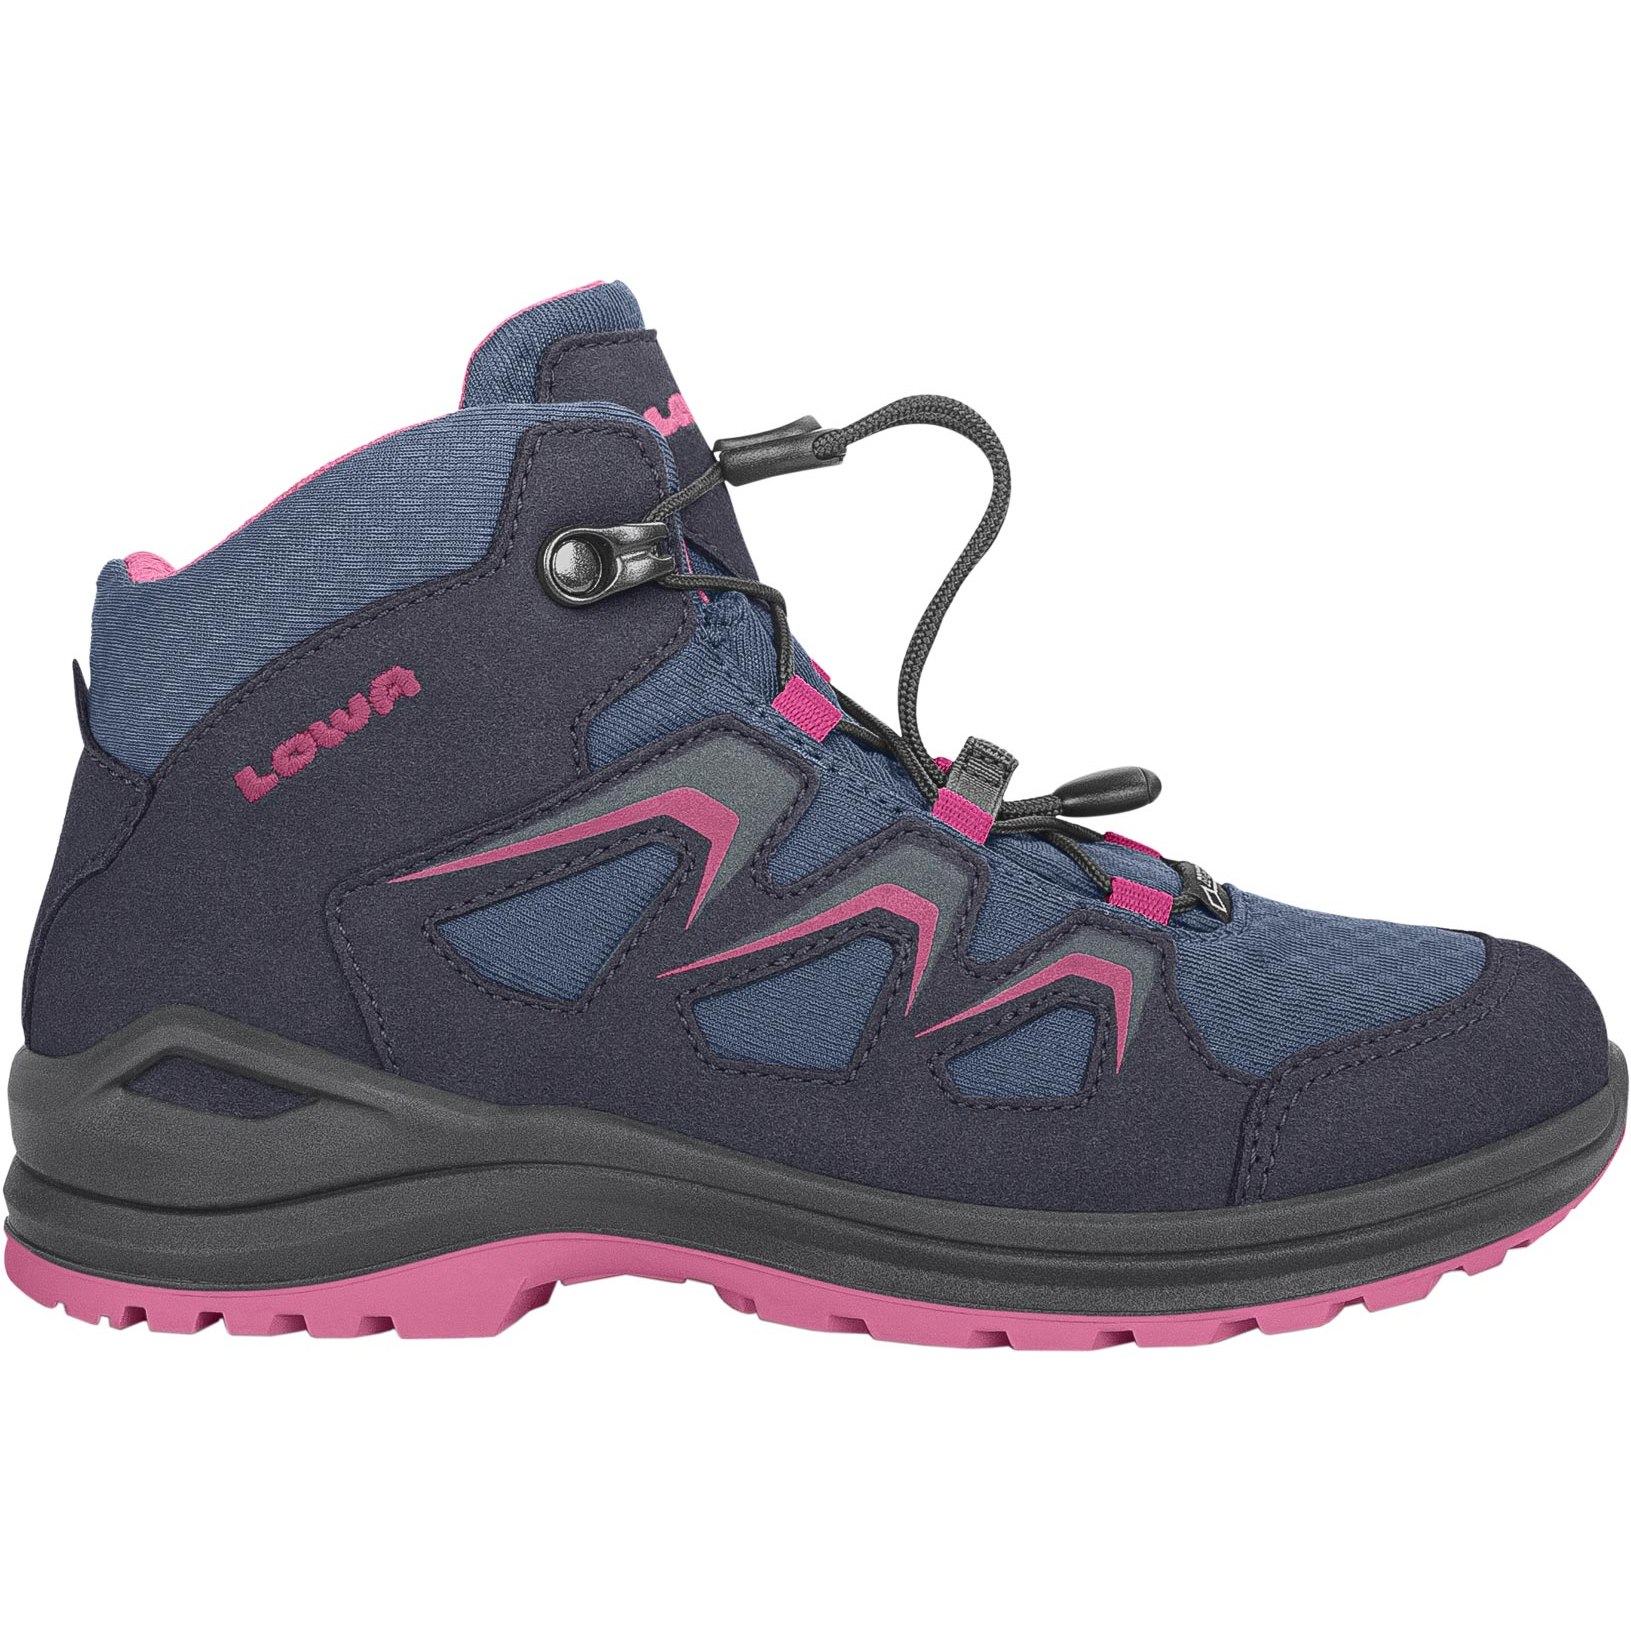 Picture of LOWA Innox Evo GTX QC Junior Kids Shoes - navy/berry (Size 26-35)